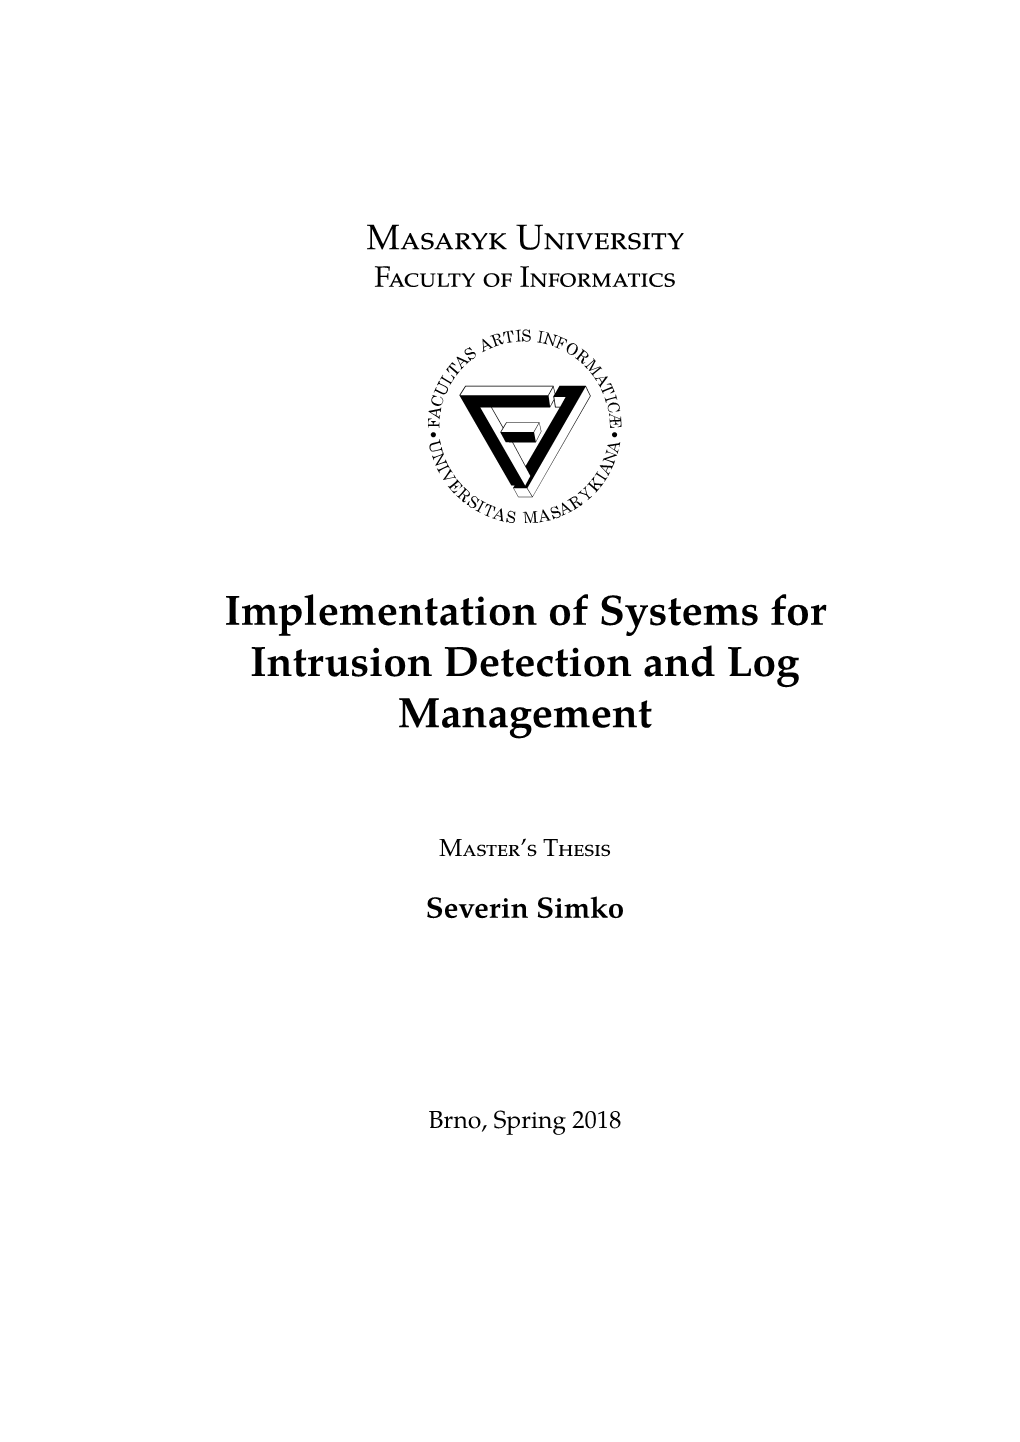 Implementation of Systems for Intrusion Detection and Log Management